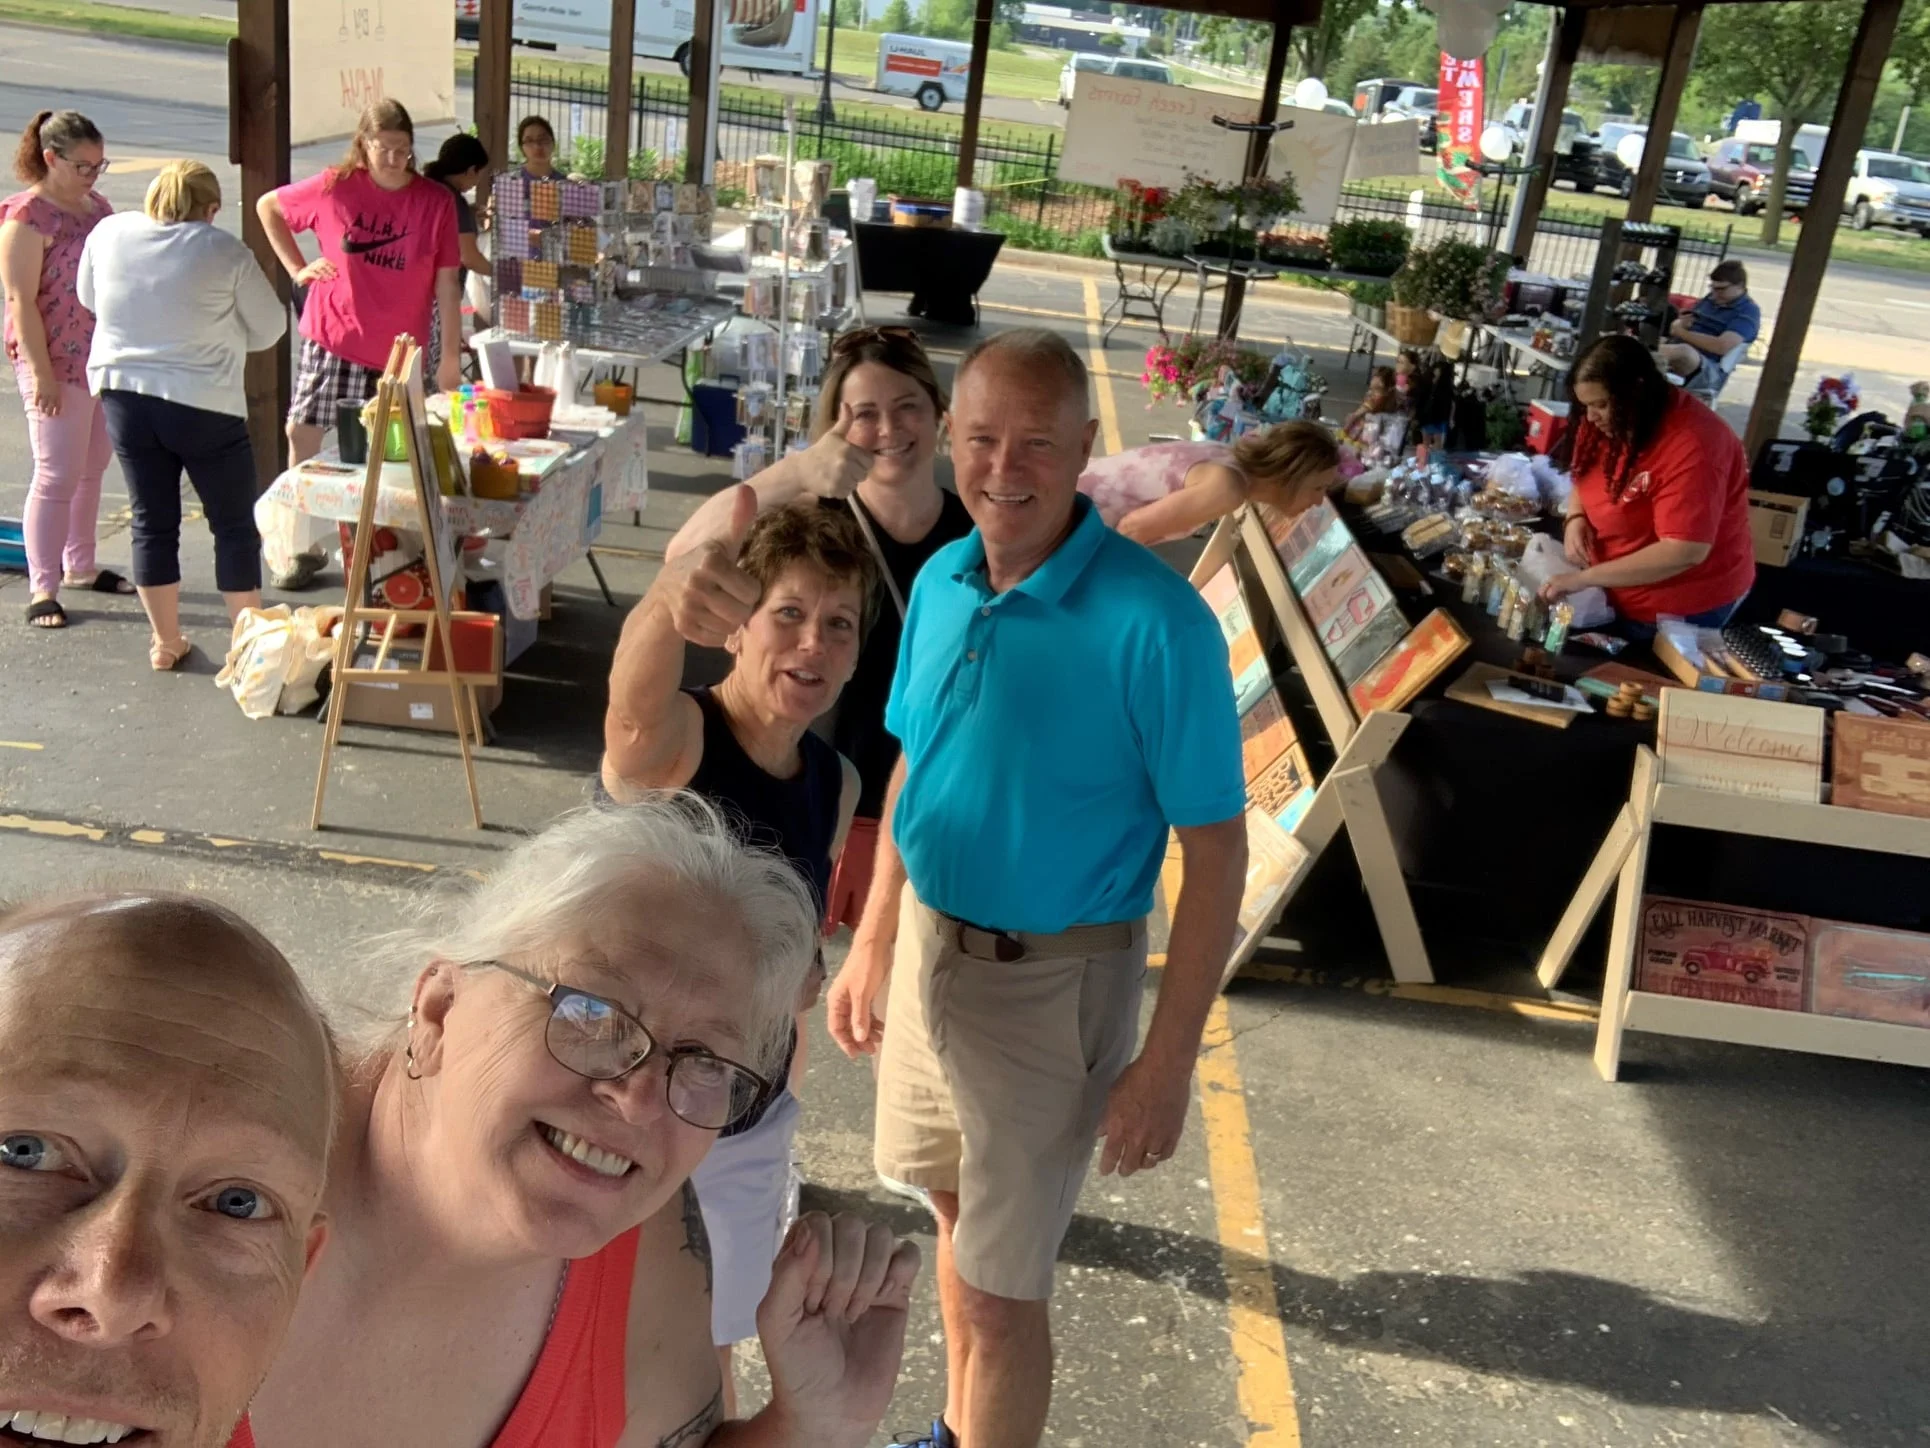 People smiling at the Farmer's Market in Ionia